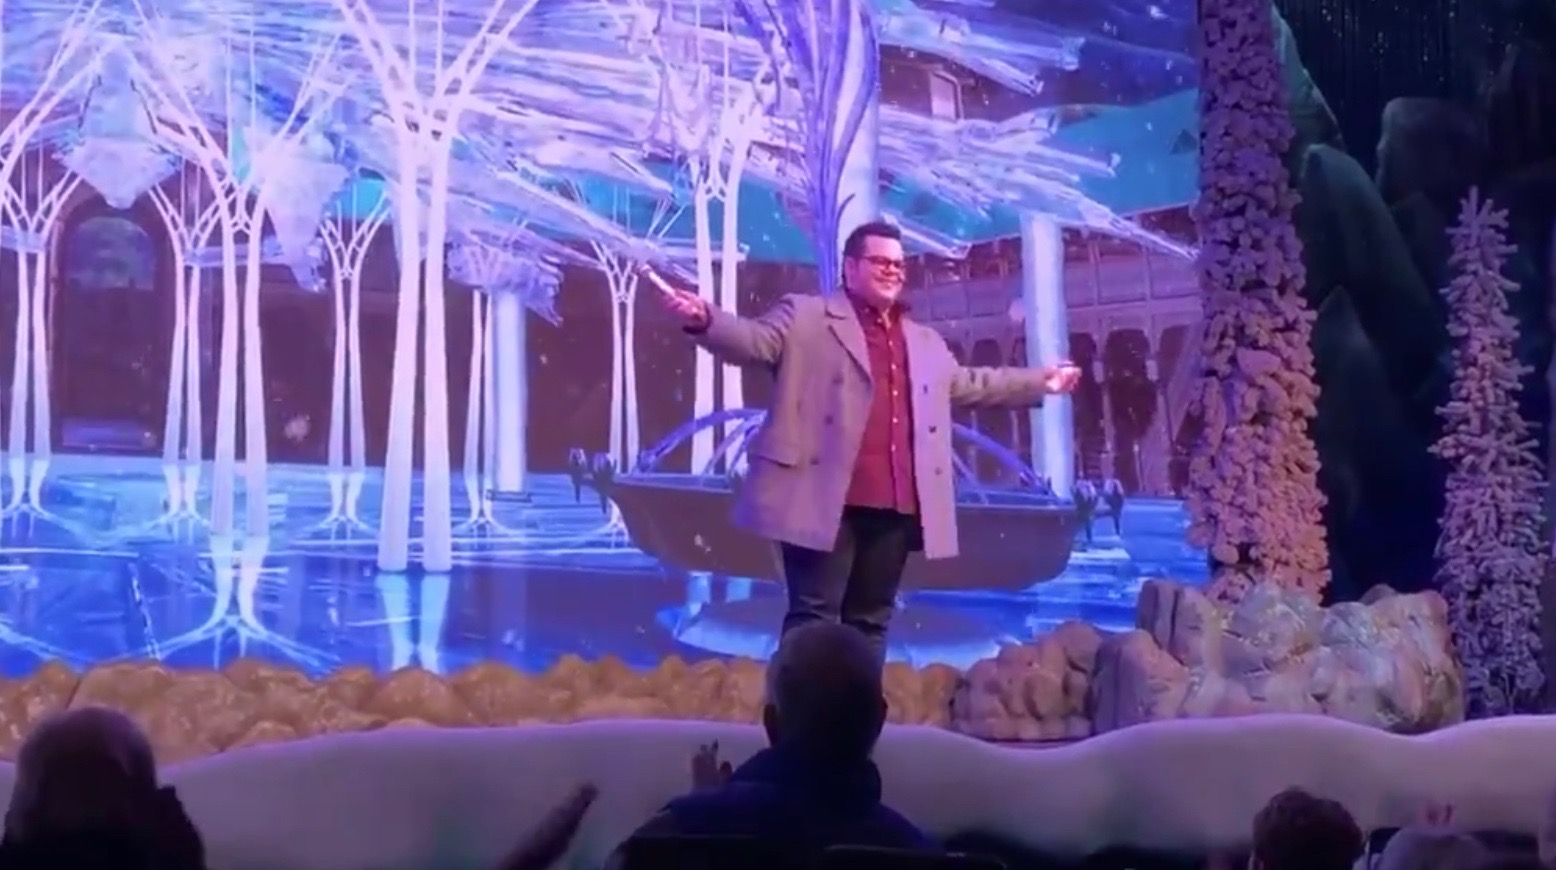 Josh Gad Makes Surprise Appearance During ‘Frozen Sing-Along’ at Disney’s Hollywood Studios